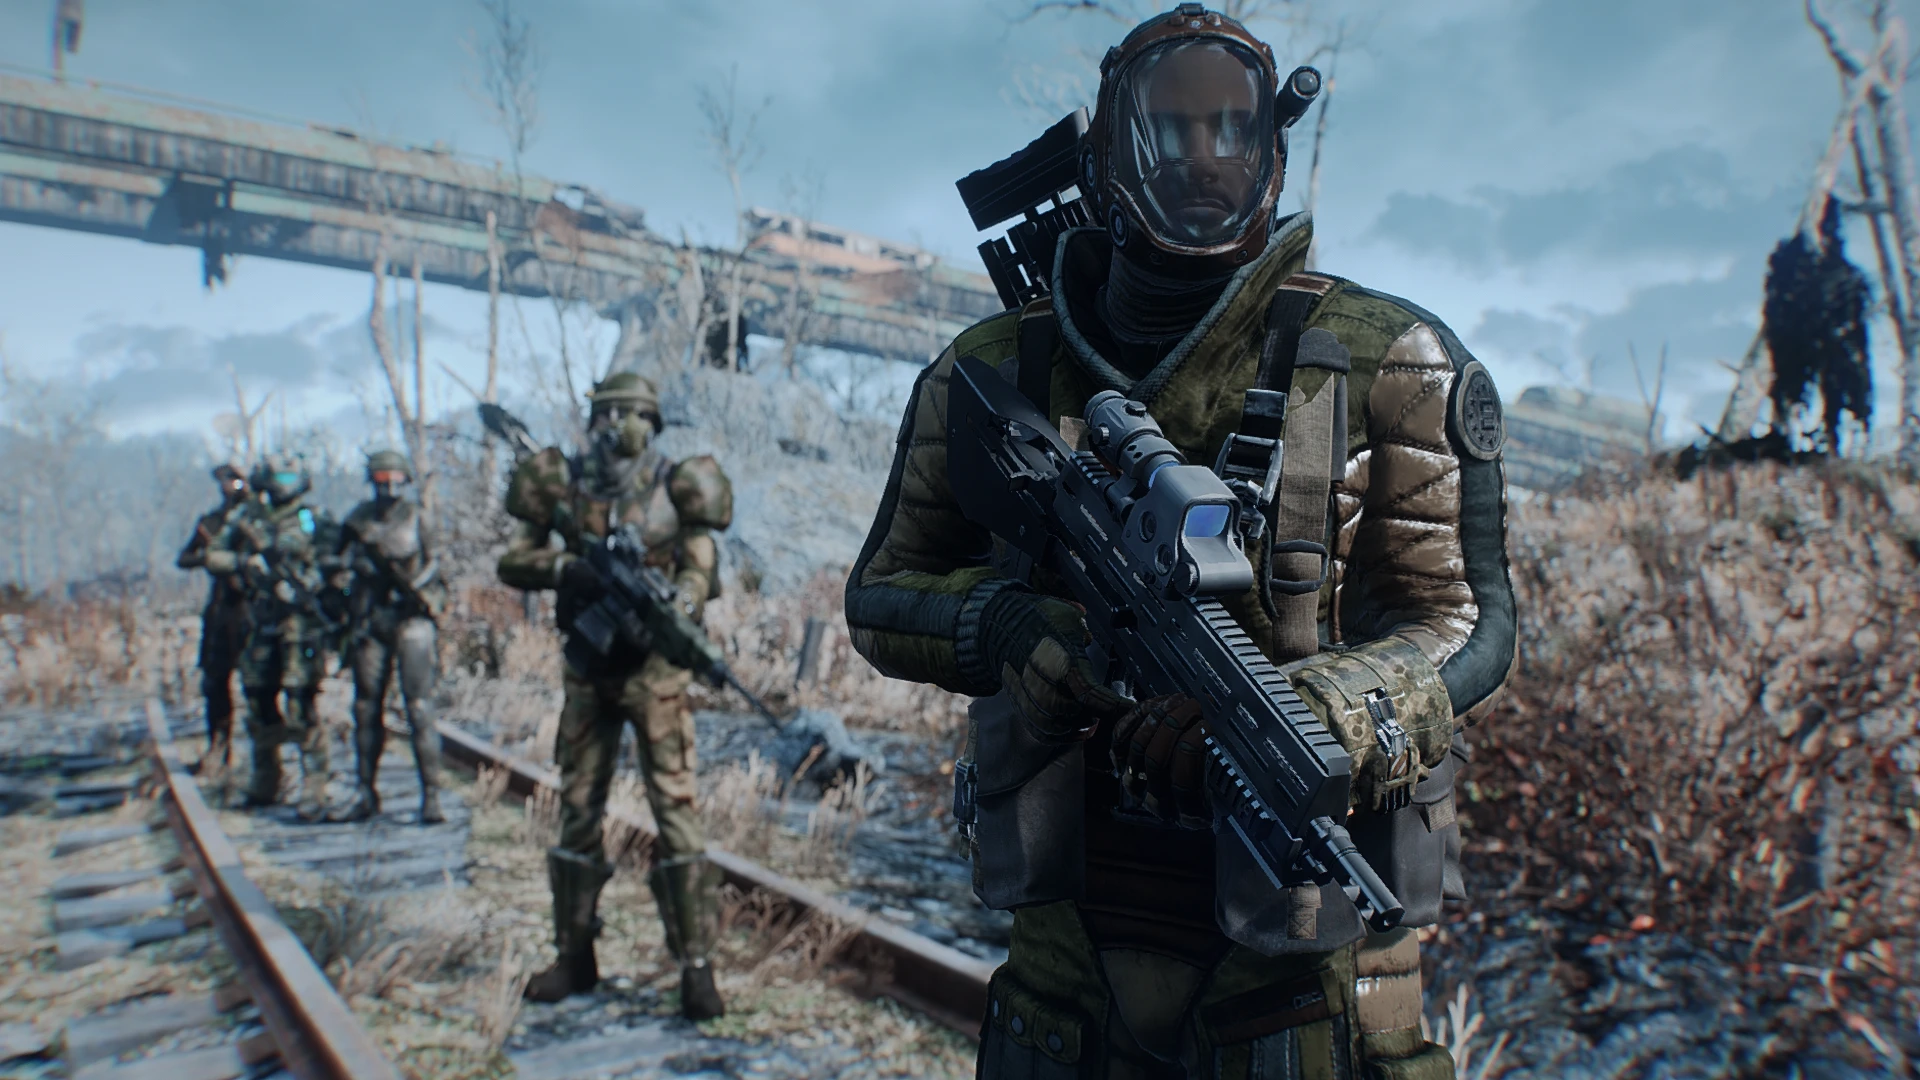 This fallout 4 mod adds 3 new armor sets into the game. 